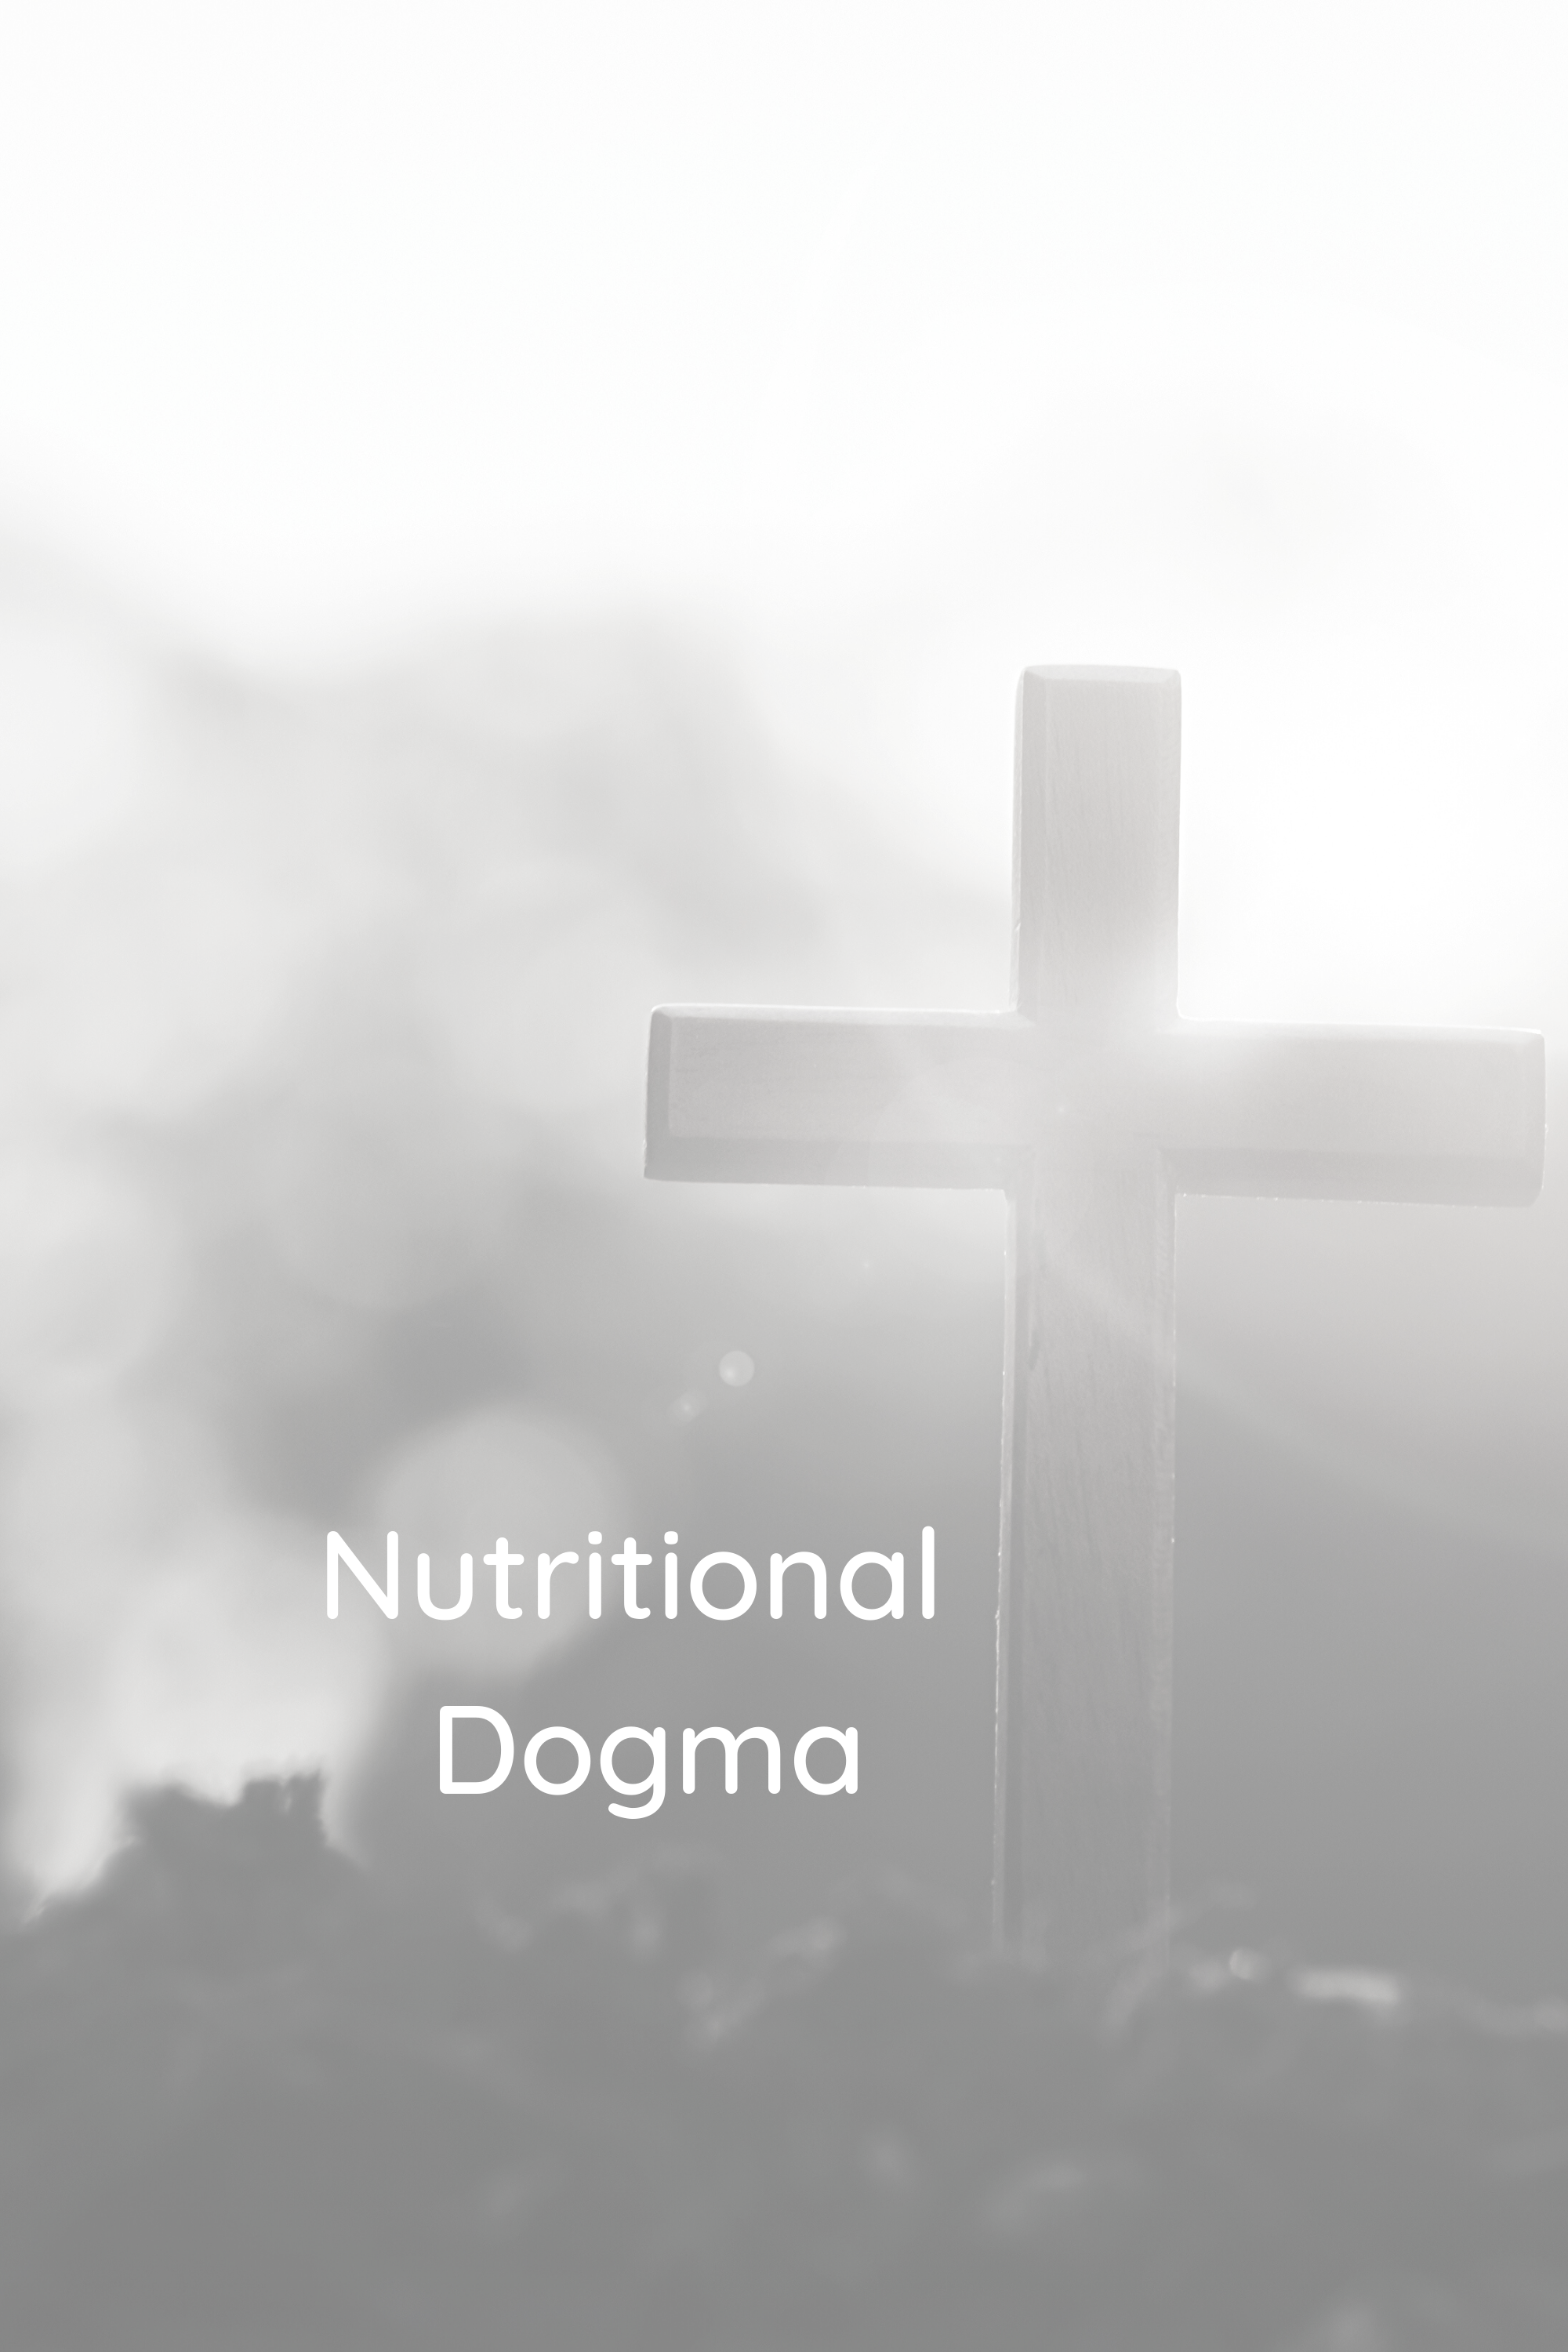 Read more about the article Nutritional Dogma